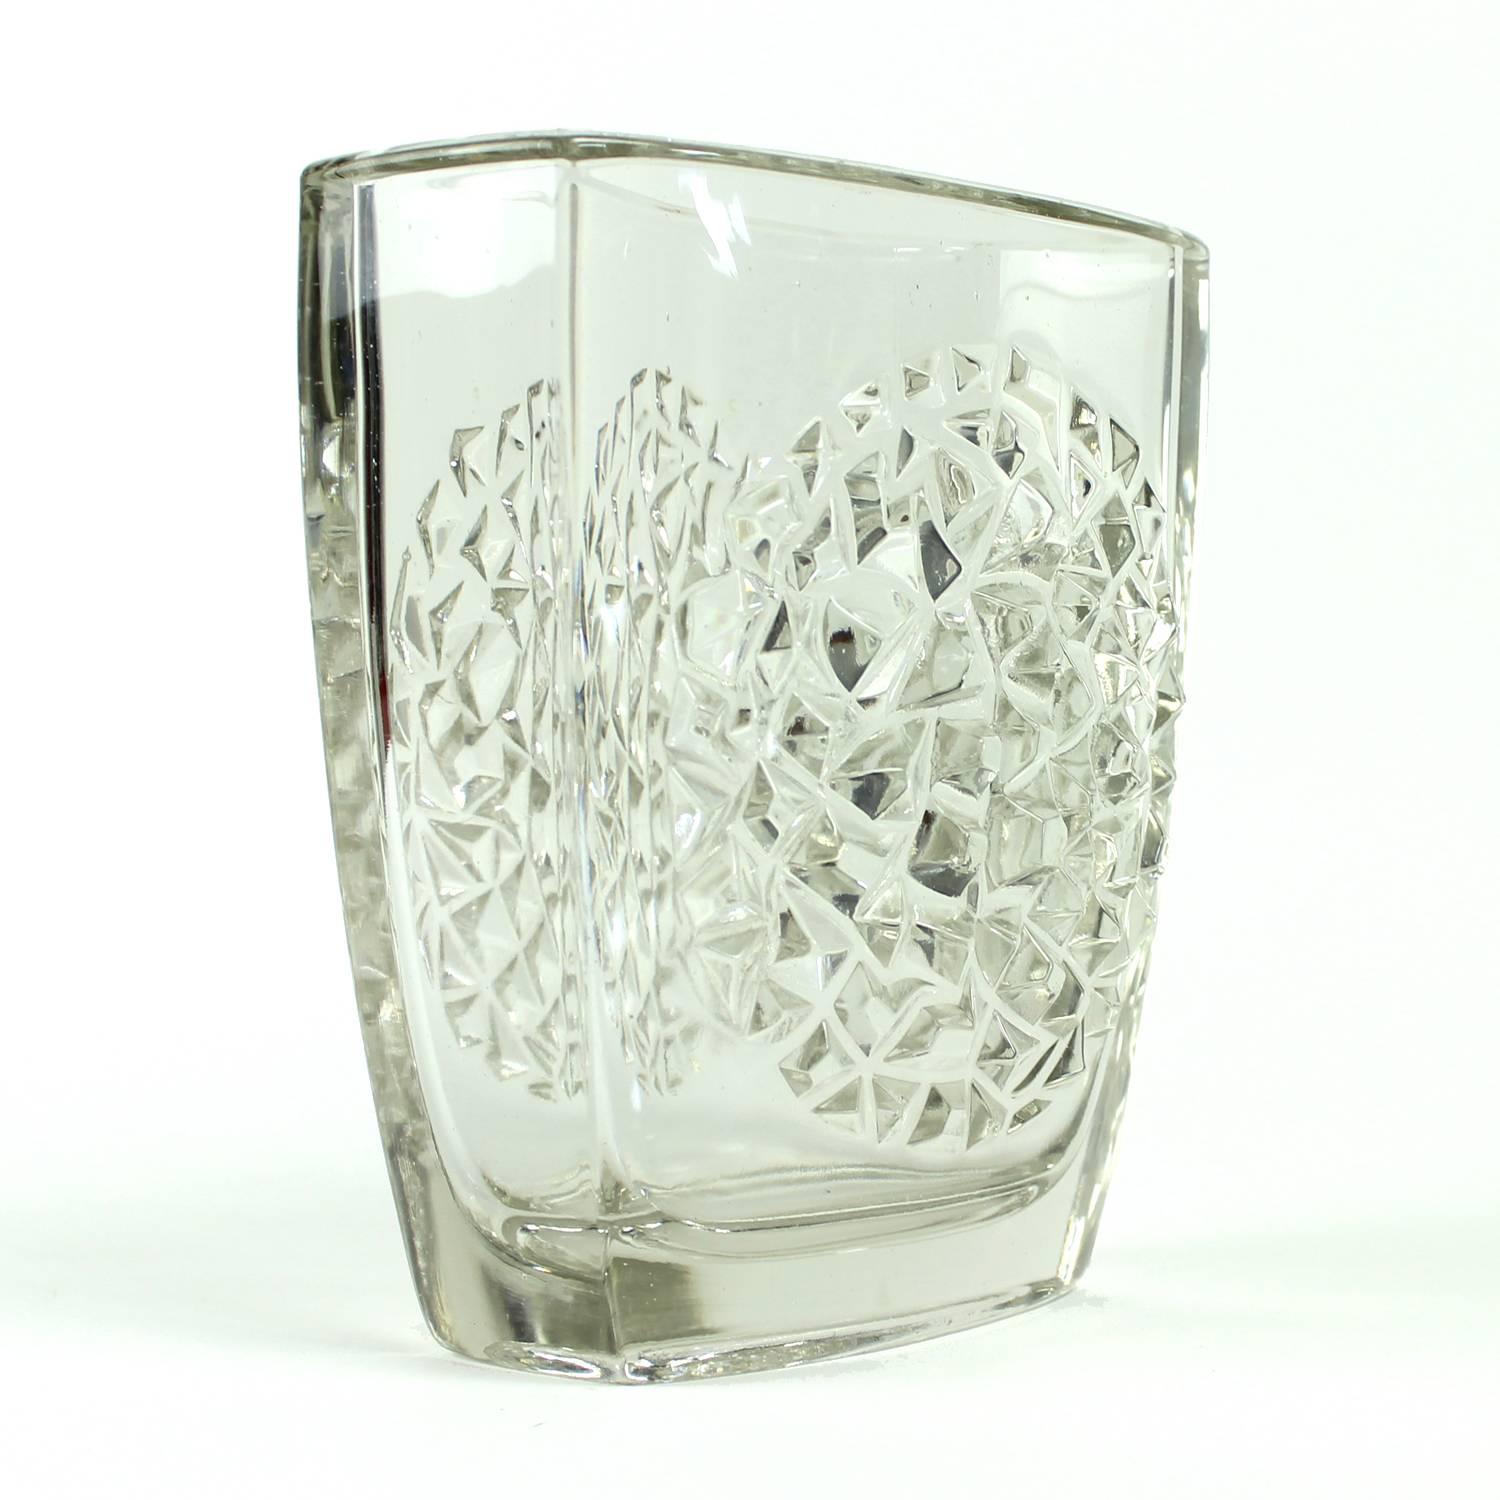 Iconic jardiniere designed by Rudolf Jurnikl for Rudolfova hut glass union in 1964. Made of pressed glass, the item weights over 1 kilo. Unique and beautiful clean glass item for real lovers of Czech glass making tradition and design.